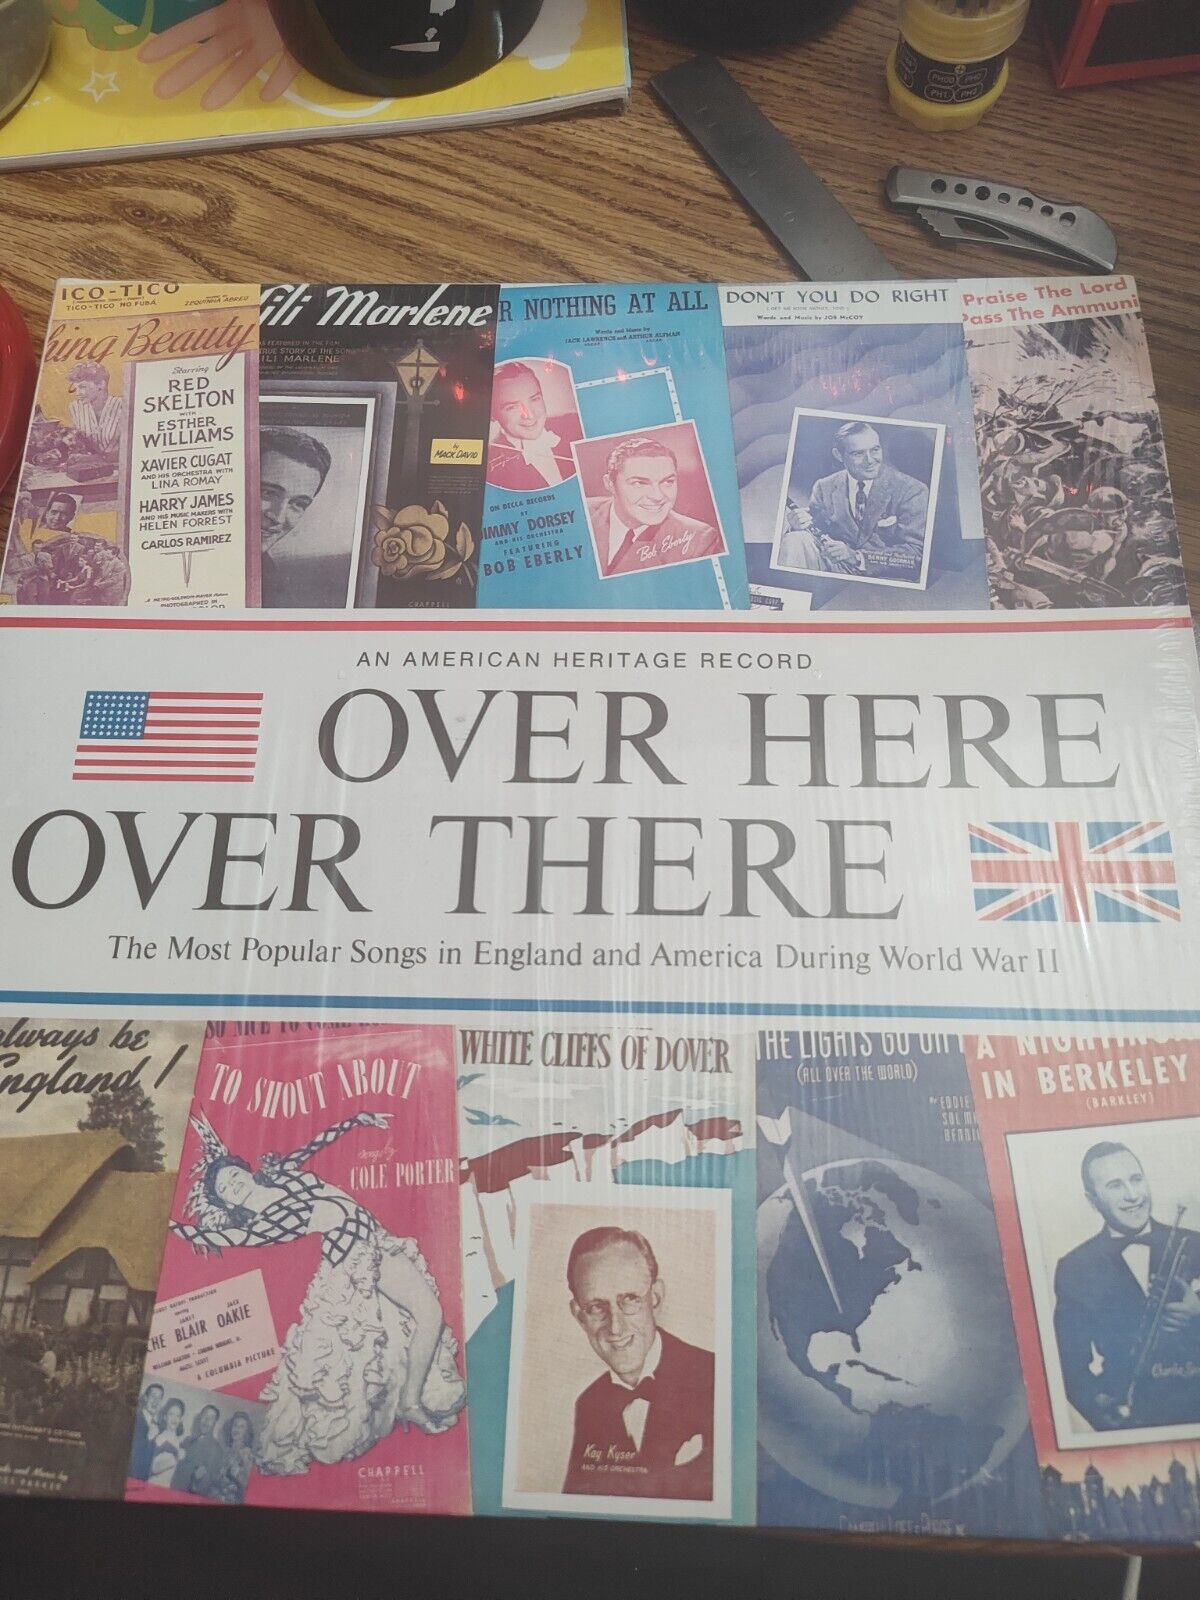 Over Here, Over There: An American Heritage Record, Popular Songs During WWII